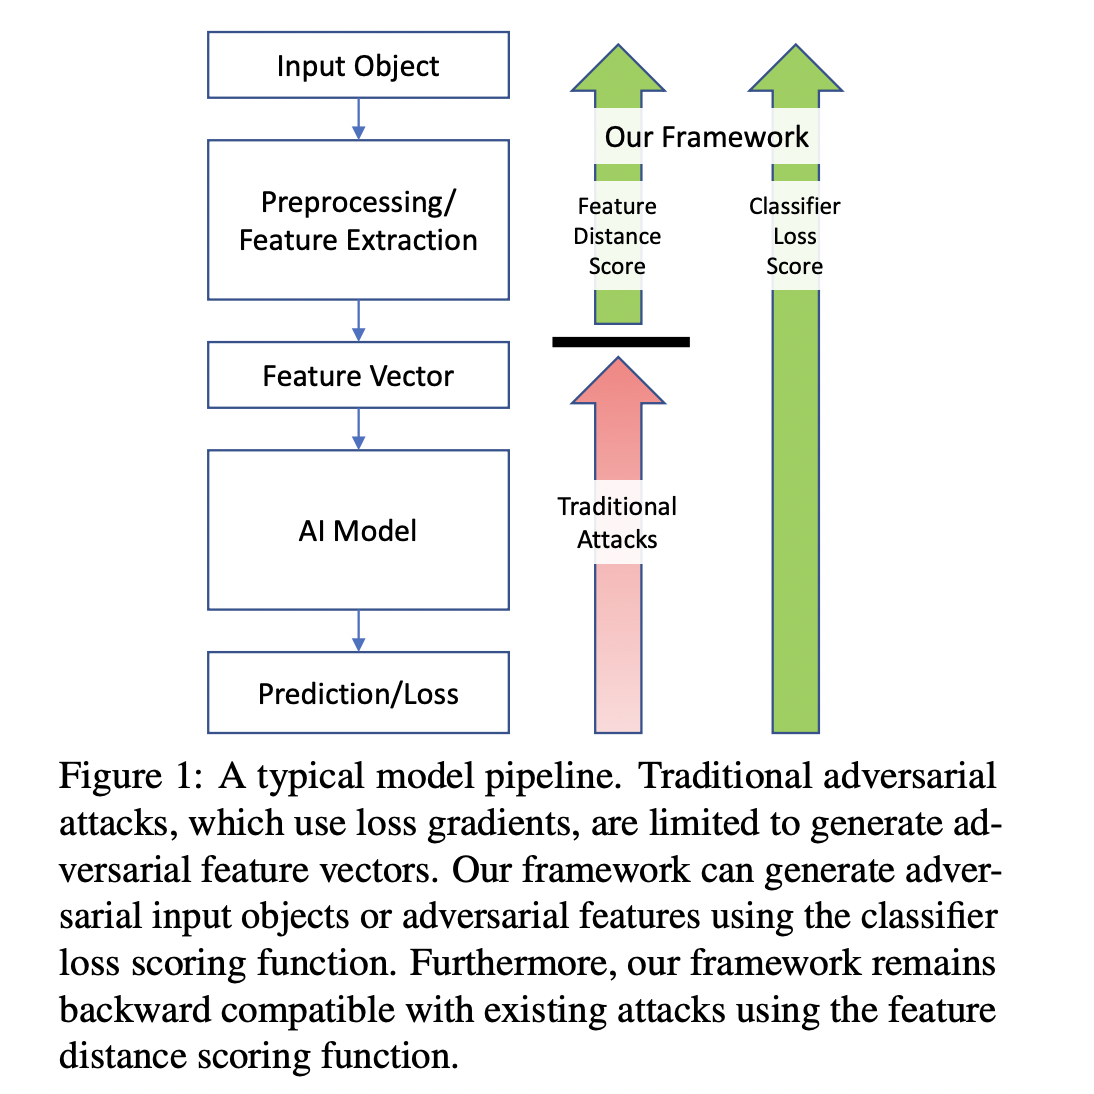 IBM Researchers Propose a New Adversarial Attack Framework Capable of Generating Adversarial Inputs for AI Systems Regardless of the Modality or Task